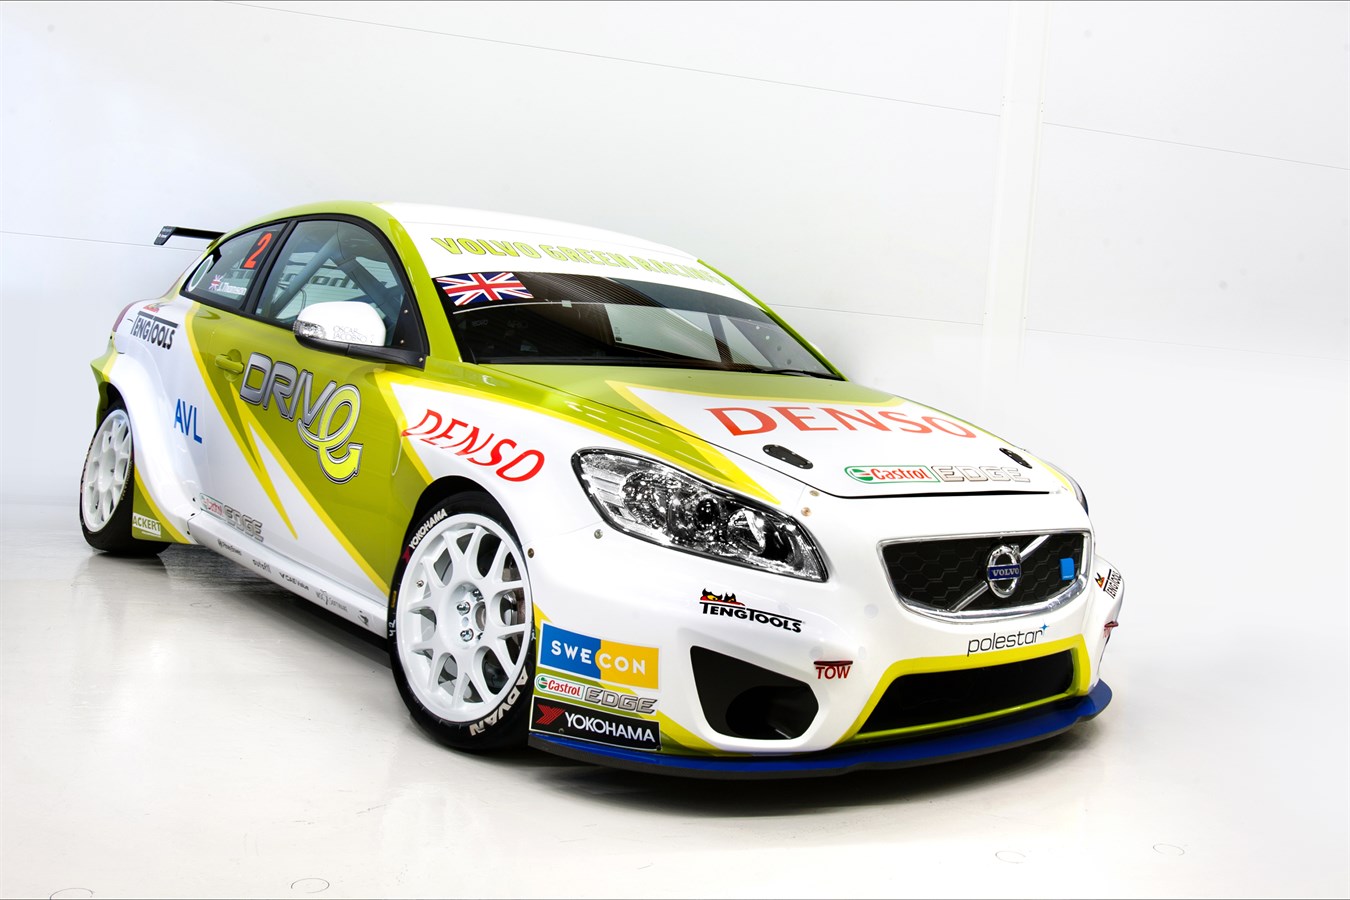 Volvo C30 DRIVe racer for the Scandinavian Touring Car Championship 2011